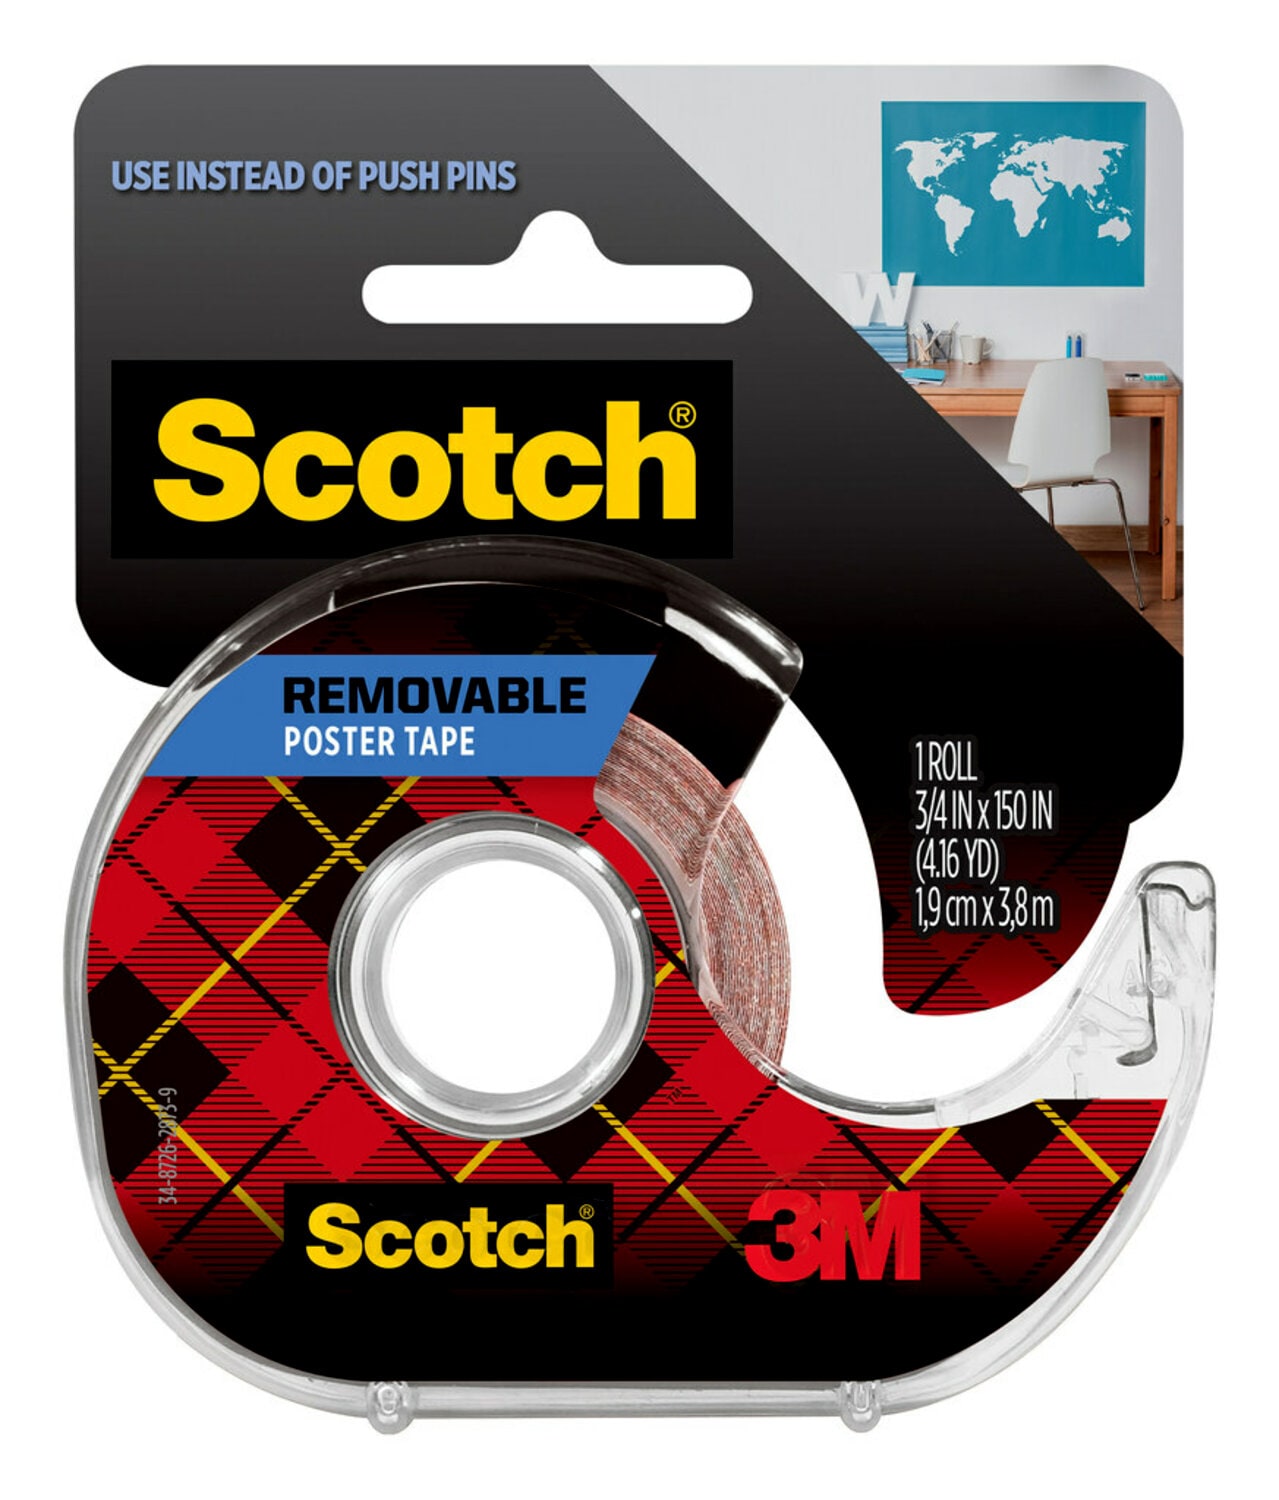 7100237871 - Scotch Removable Poster Tape 109S, 0.75 in x 150 in (1.9 cm x 3.8 m)